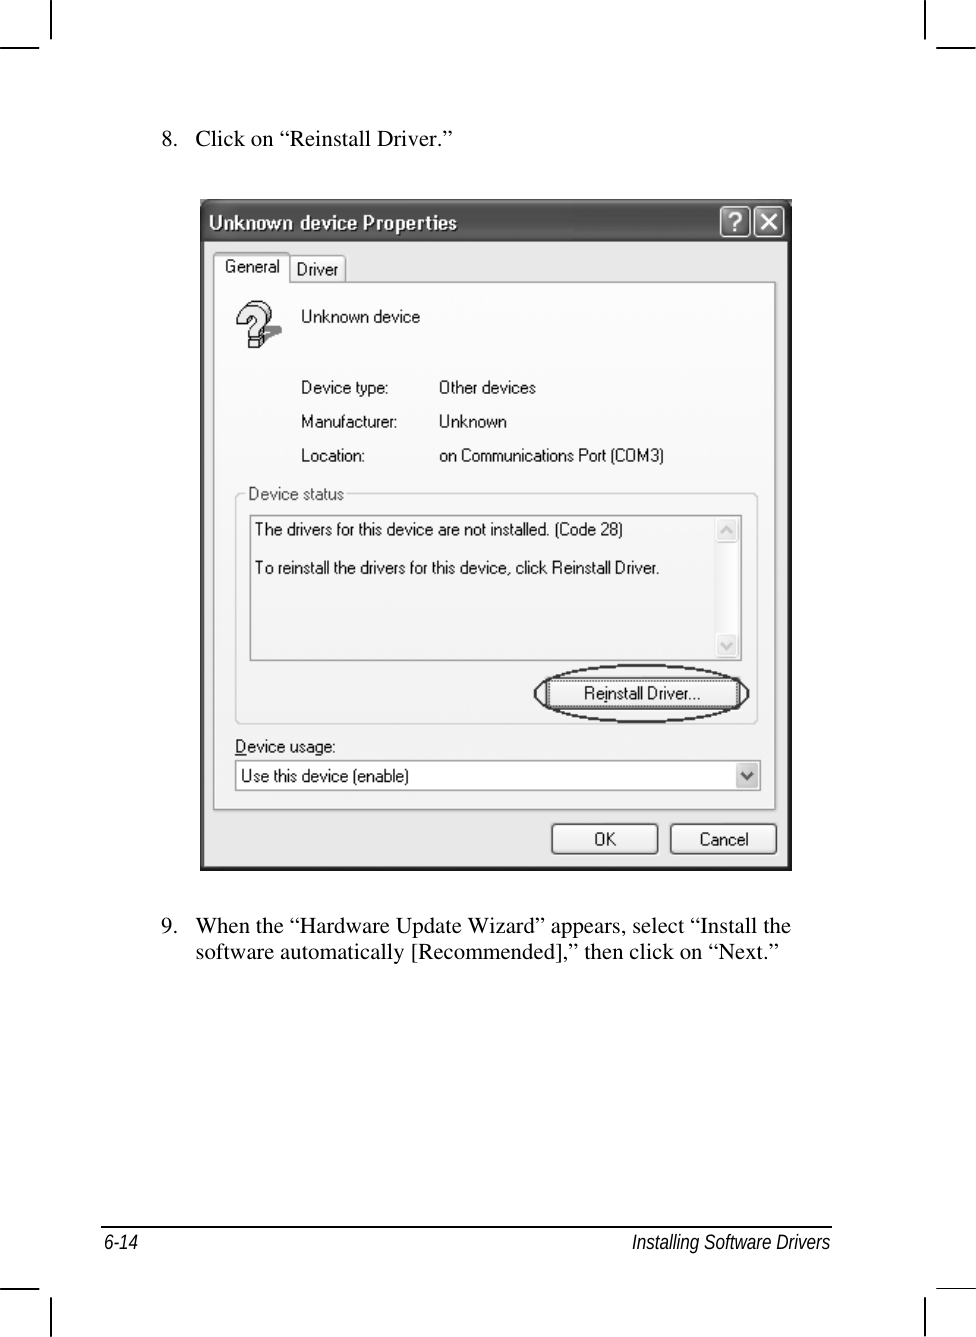  6-14  Installing Software Drivers 8.  Click on “Reinstall Driver.”  9.  When the “Hardware Update Wizard” appears, select “Install the software automatically [Recommended],” then click on “Next.” 